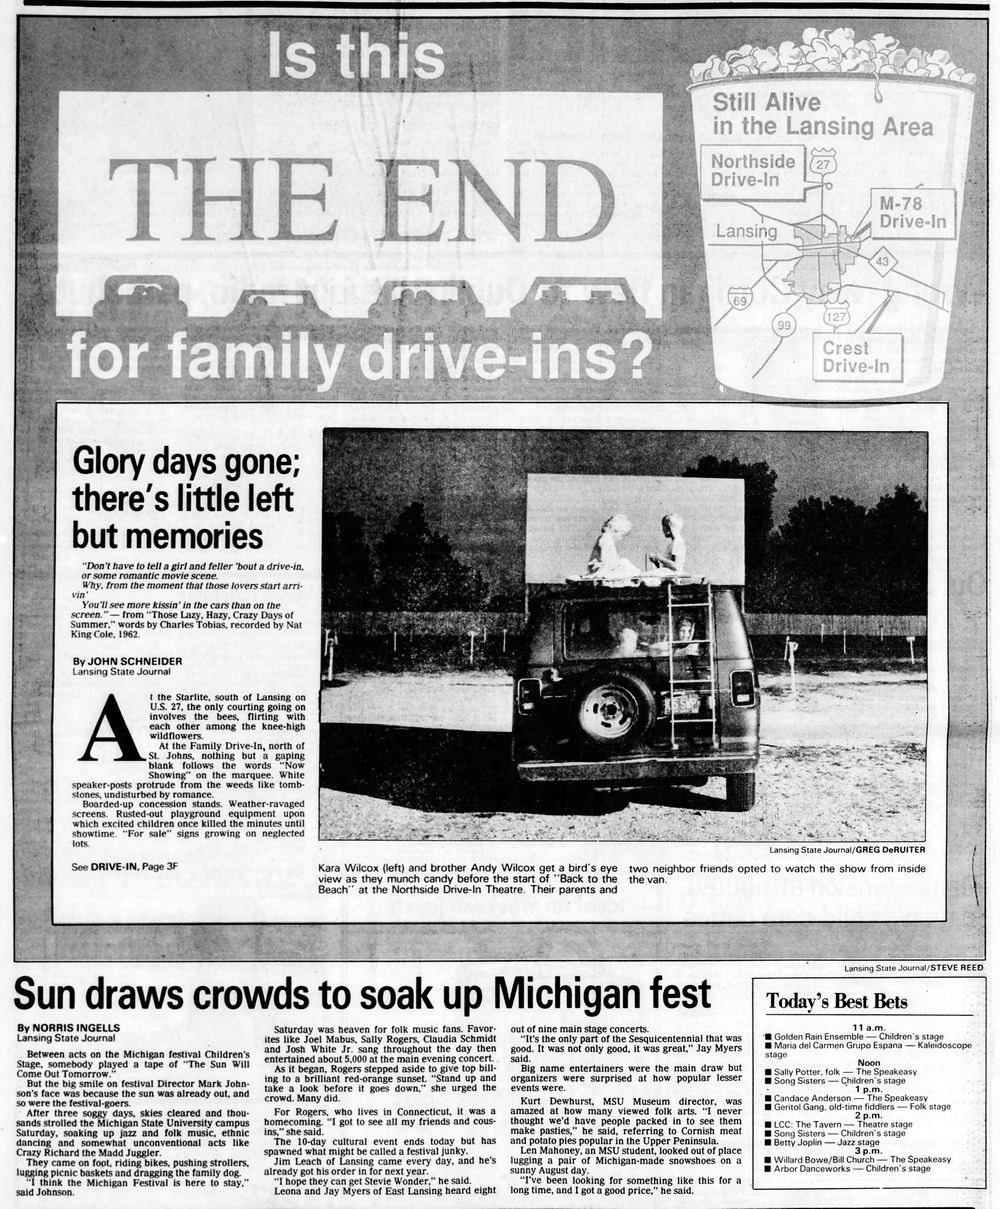 Hub Motel - Aug 30 1987 Article On Closing Of Drive-Ins